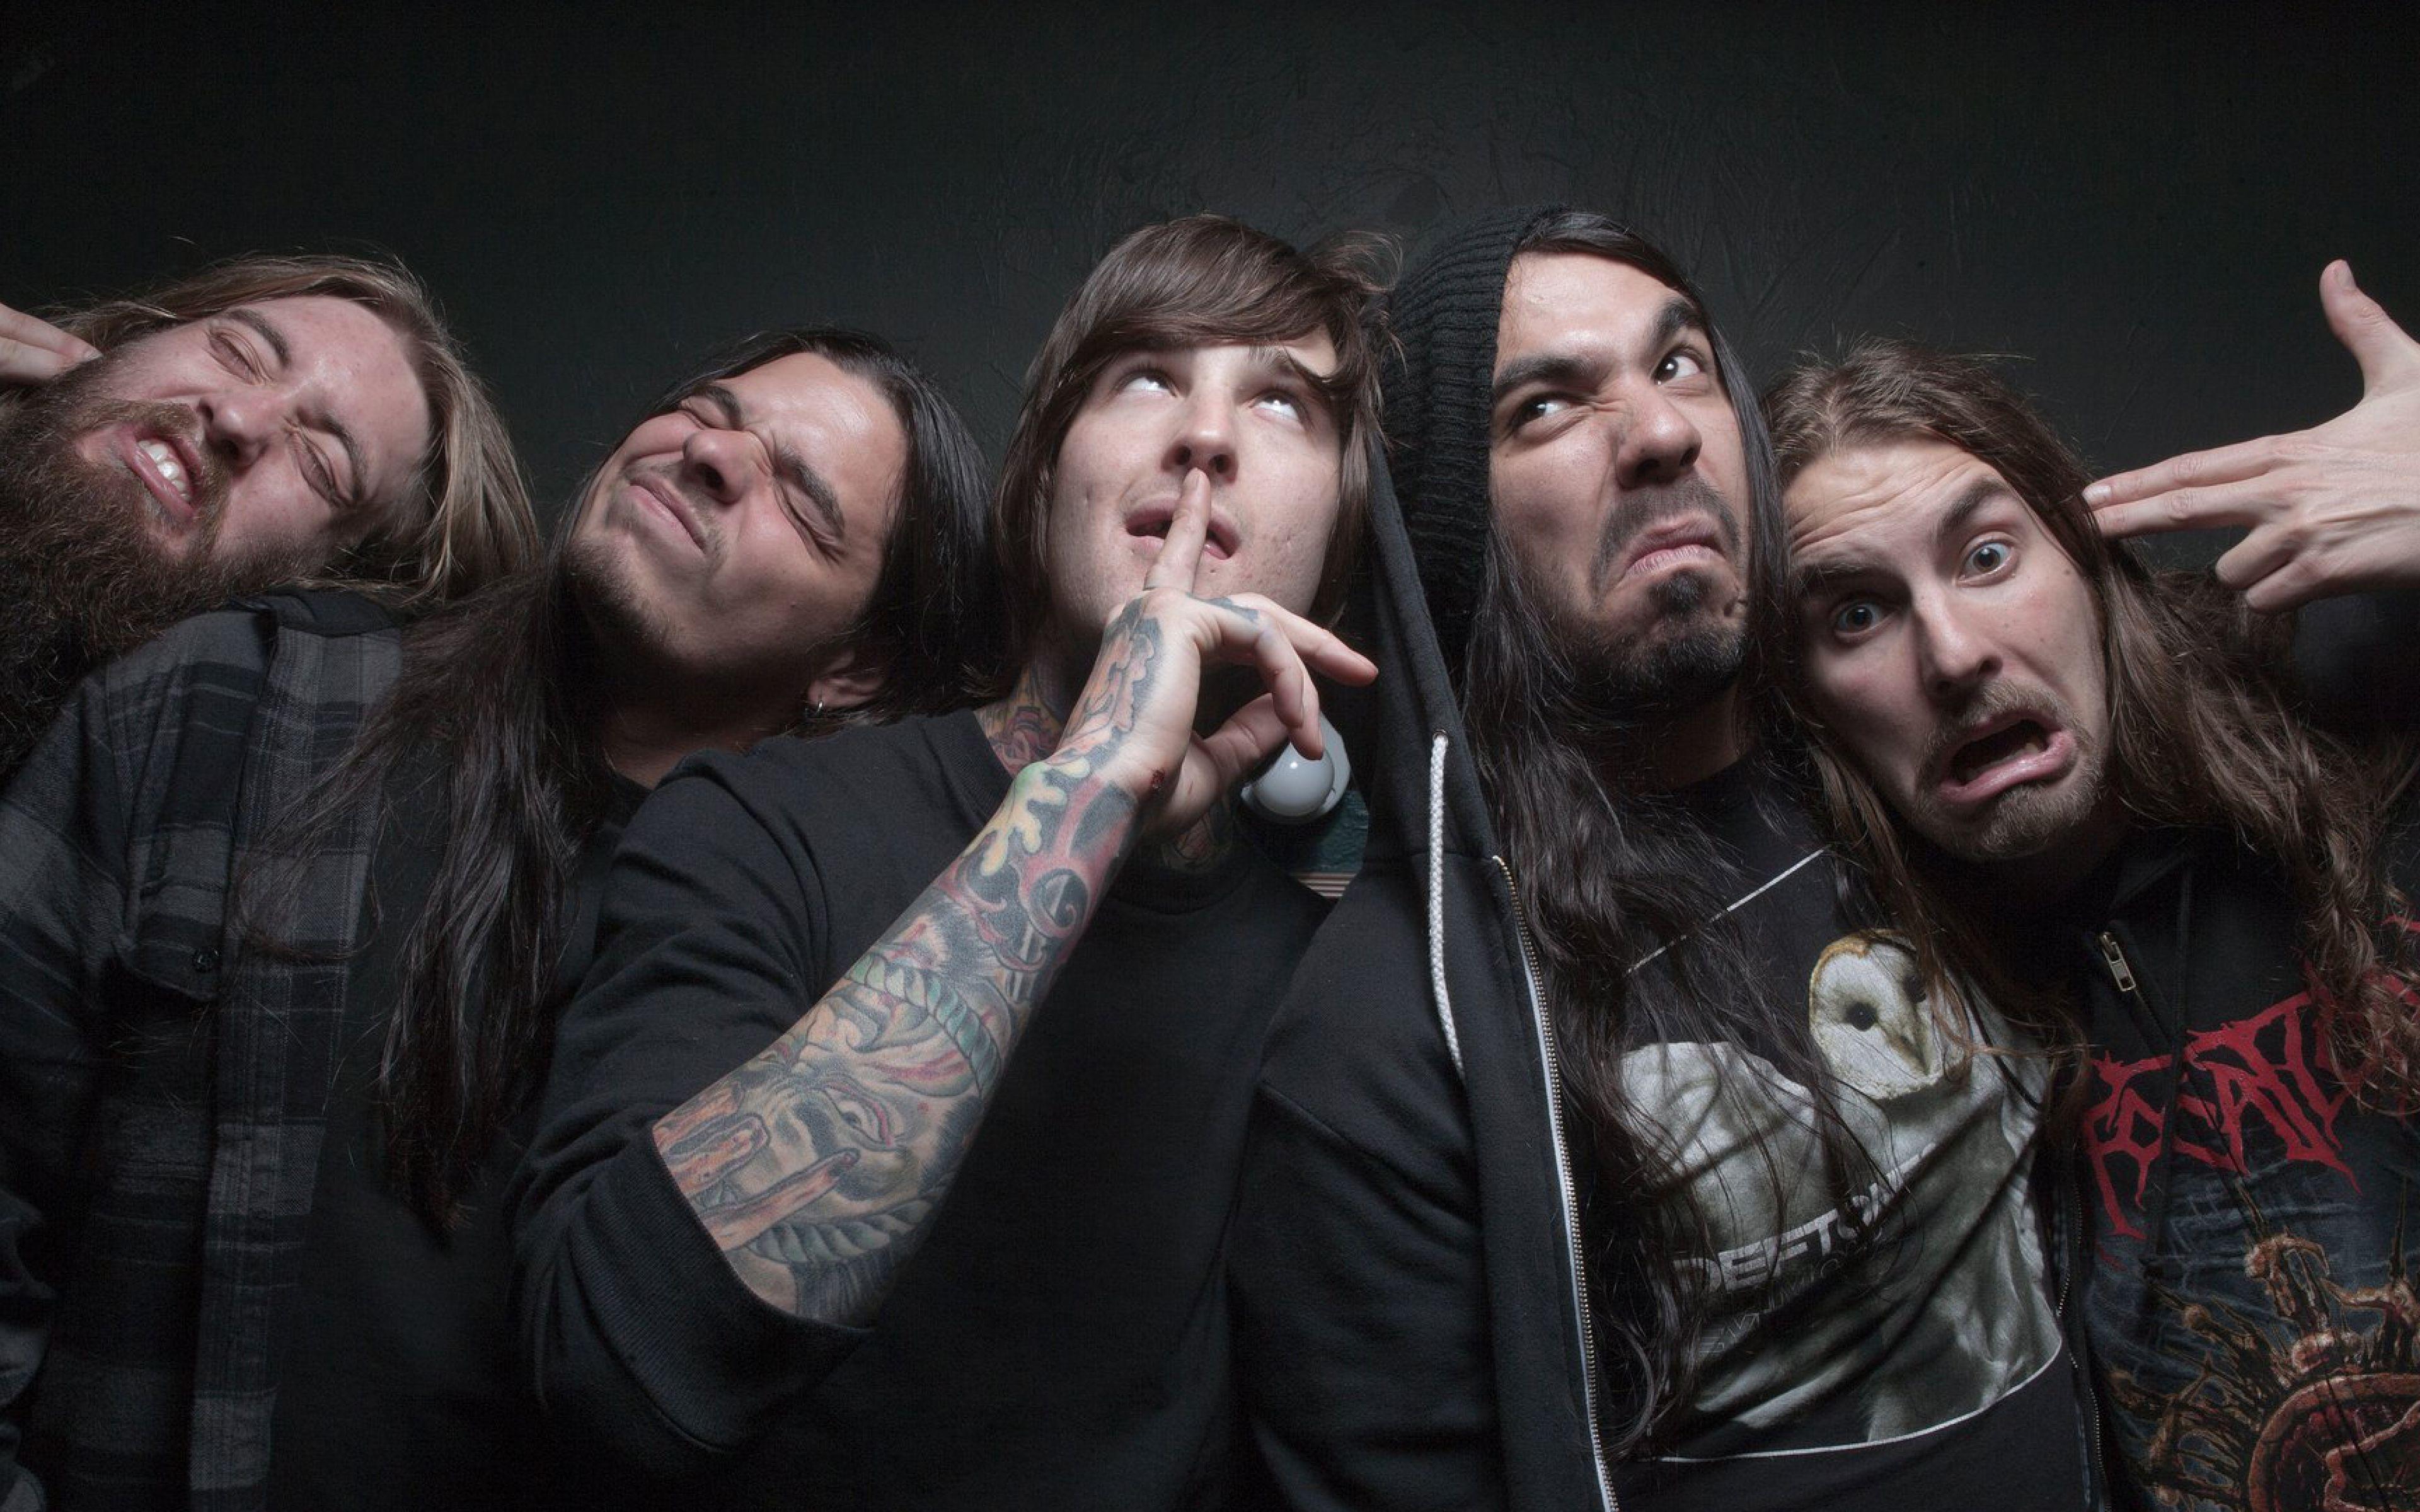 Download Wallpaper 3840x2400 Suicide silence, Deathcore, Mark